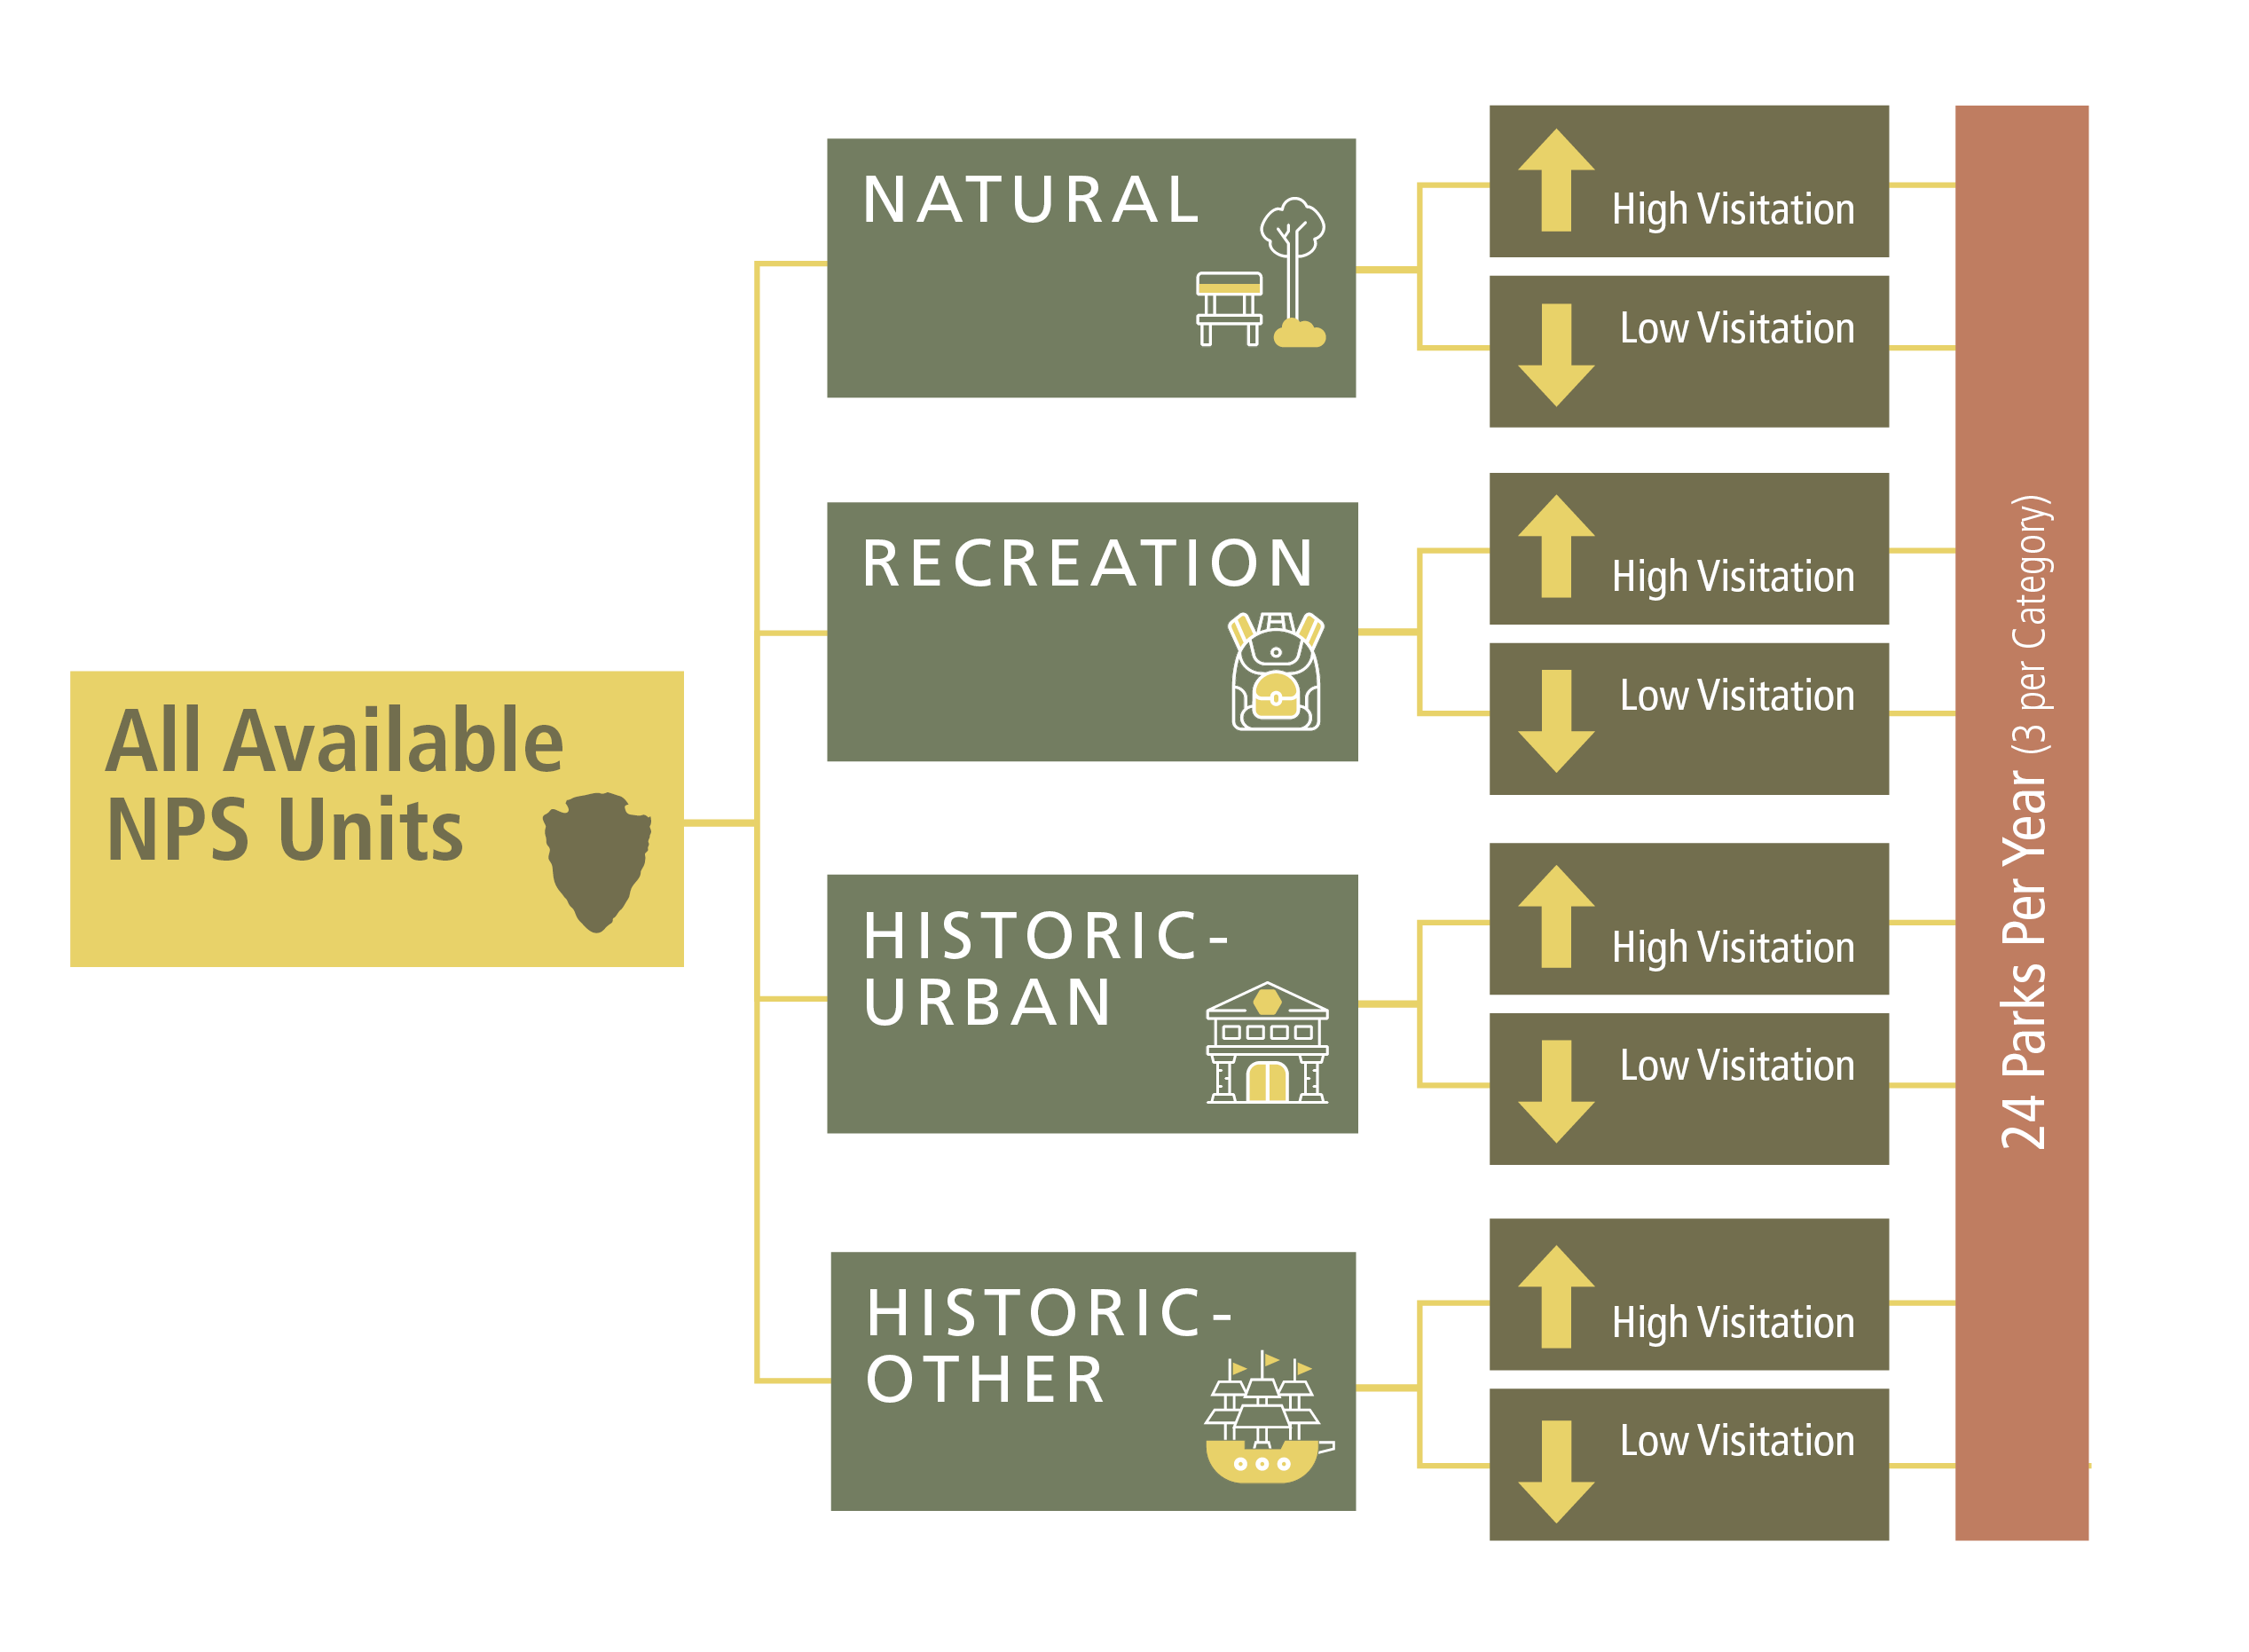 A flow chart working from left to right showing how all available park units are broken down into categories based on park type and then by visitation level (high or low). Each year, three parks are selected from each subsection for a total of 24 parks.